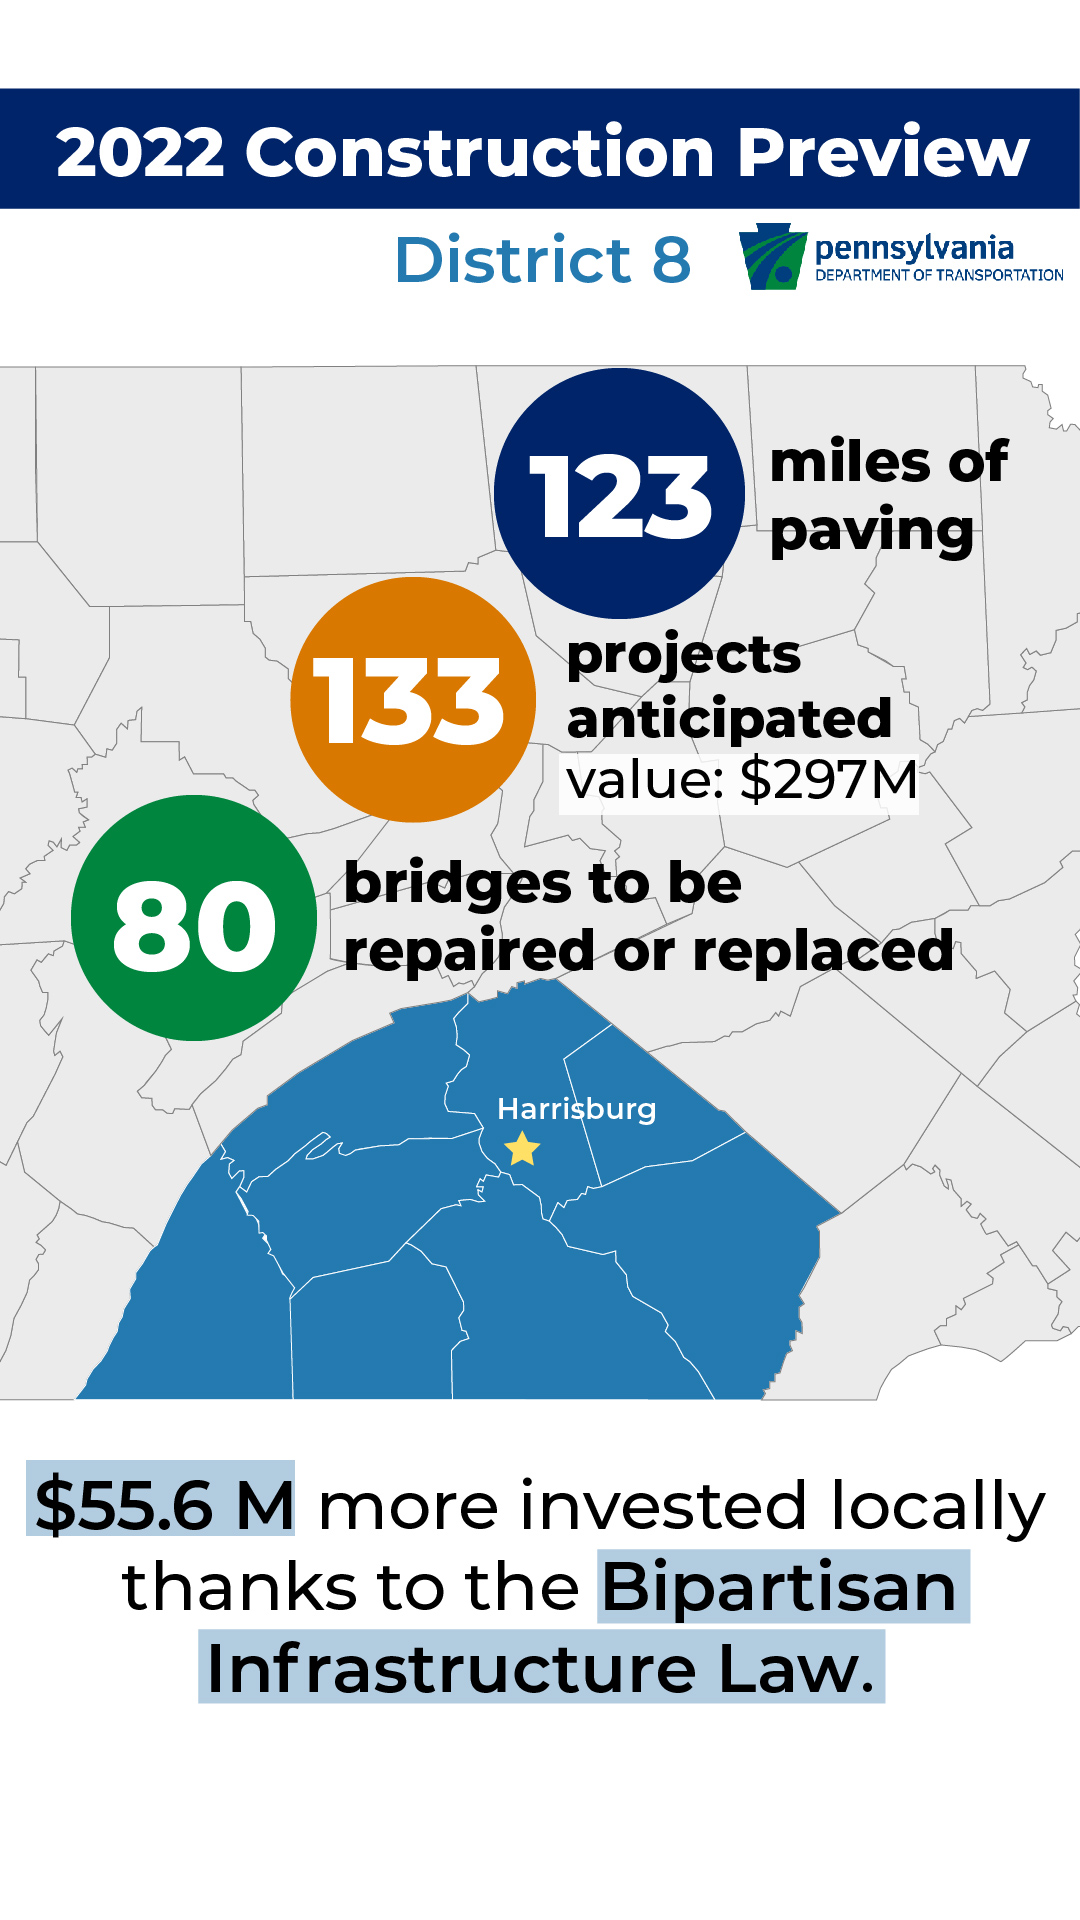 In PennDOT's District 8, 133 projects are anticipated for 2022 with a value of $297 million. Also expect 123 miles of paving and 80 bridge repairs or replacements. Thanks to the Bipartisan Infrastructure Law, $55.6 million more will be invested locally.